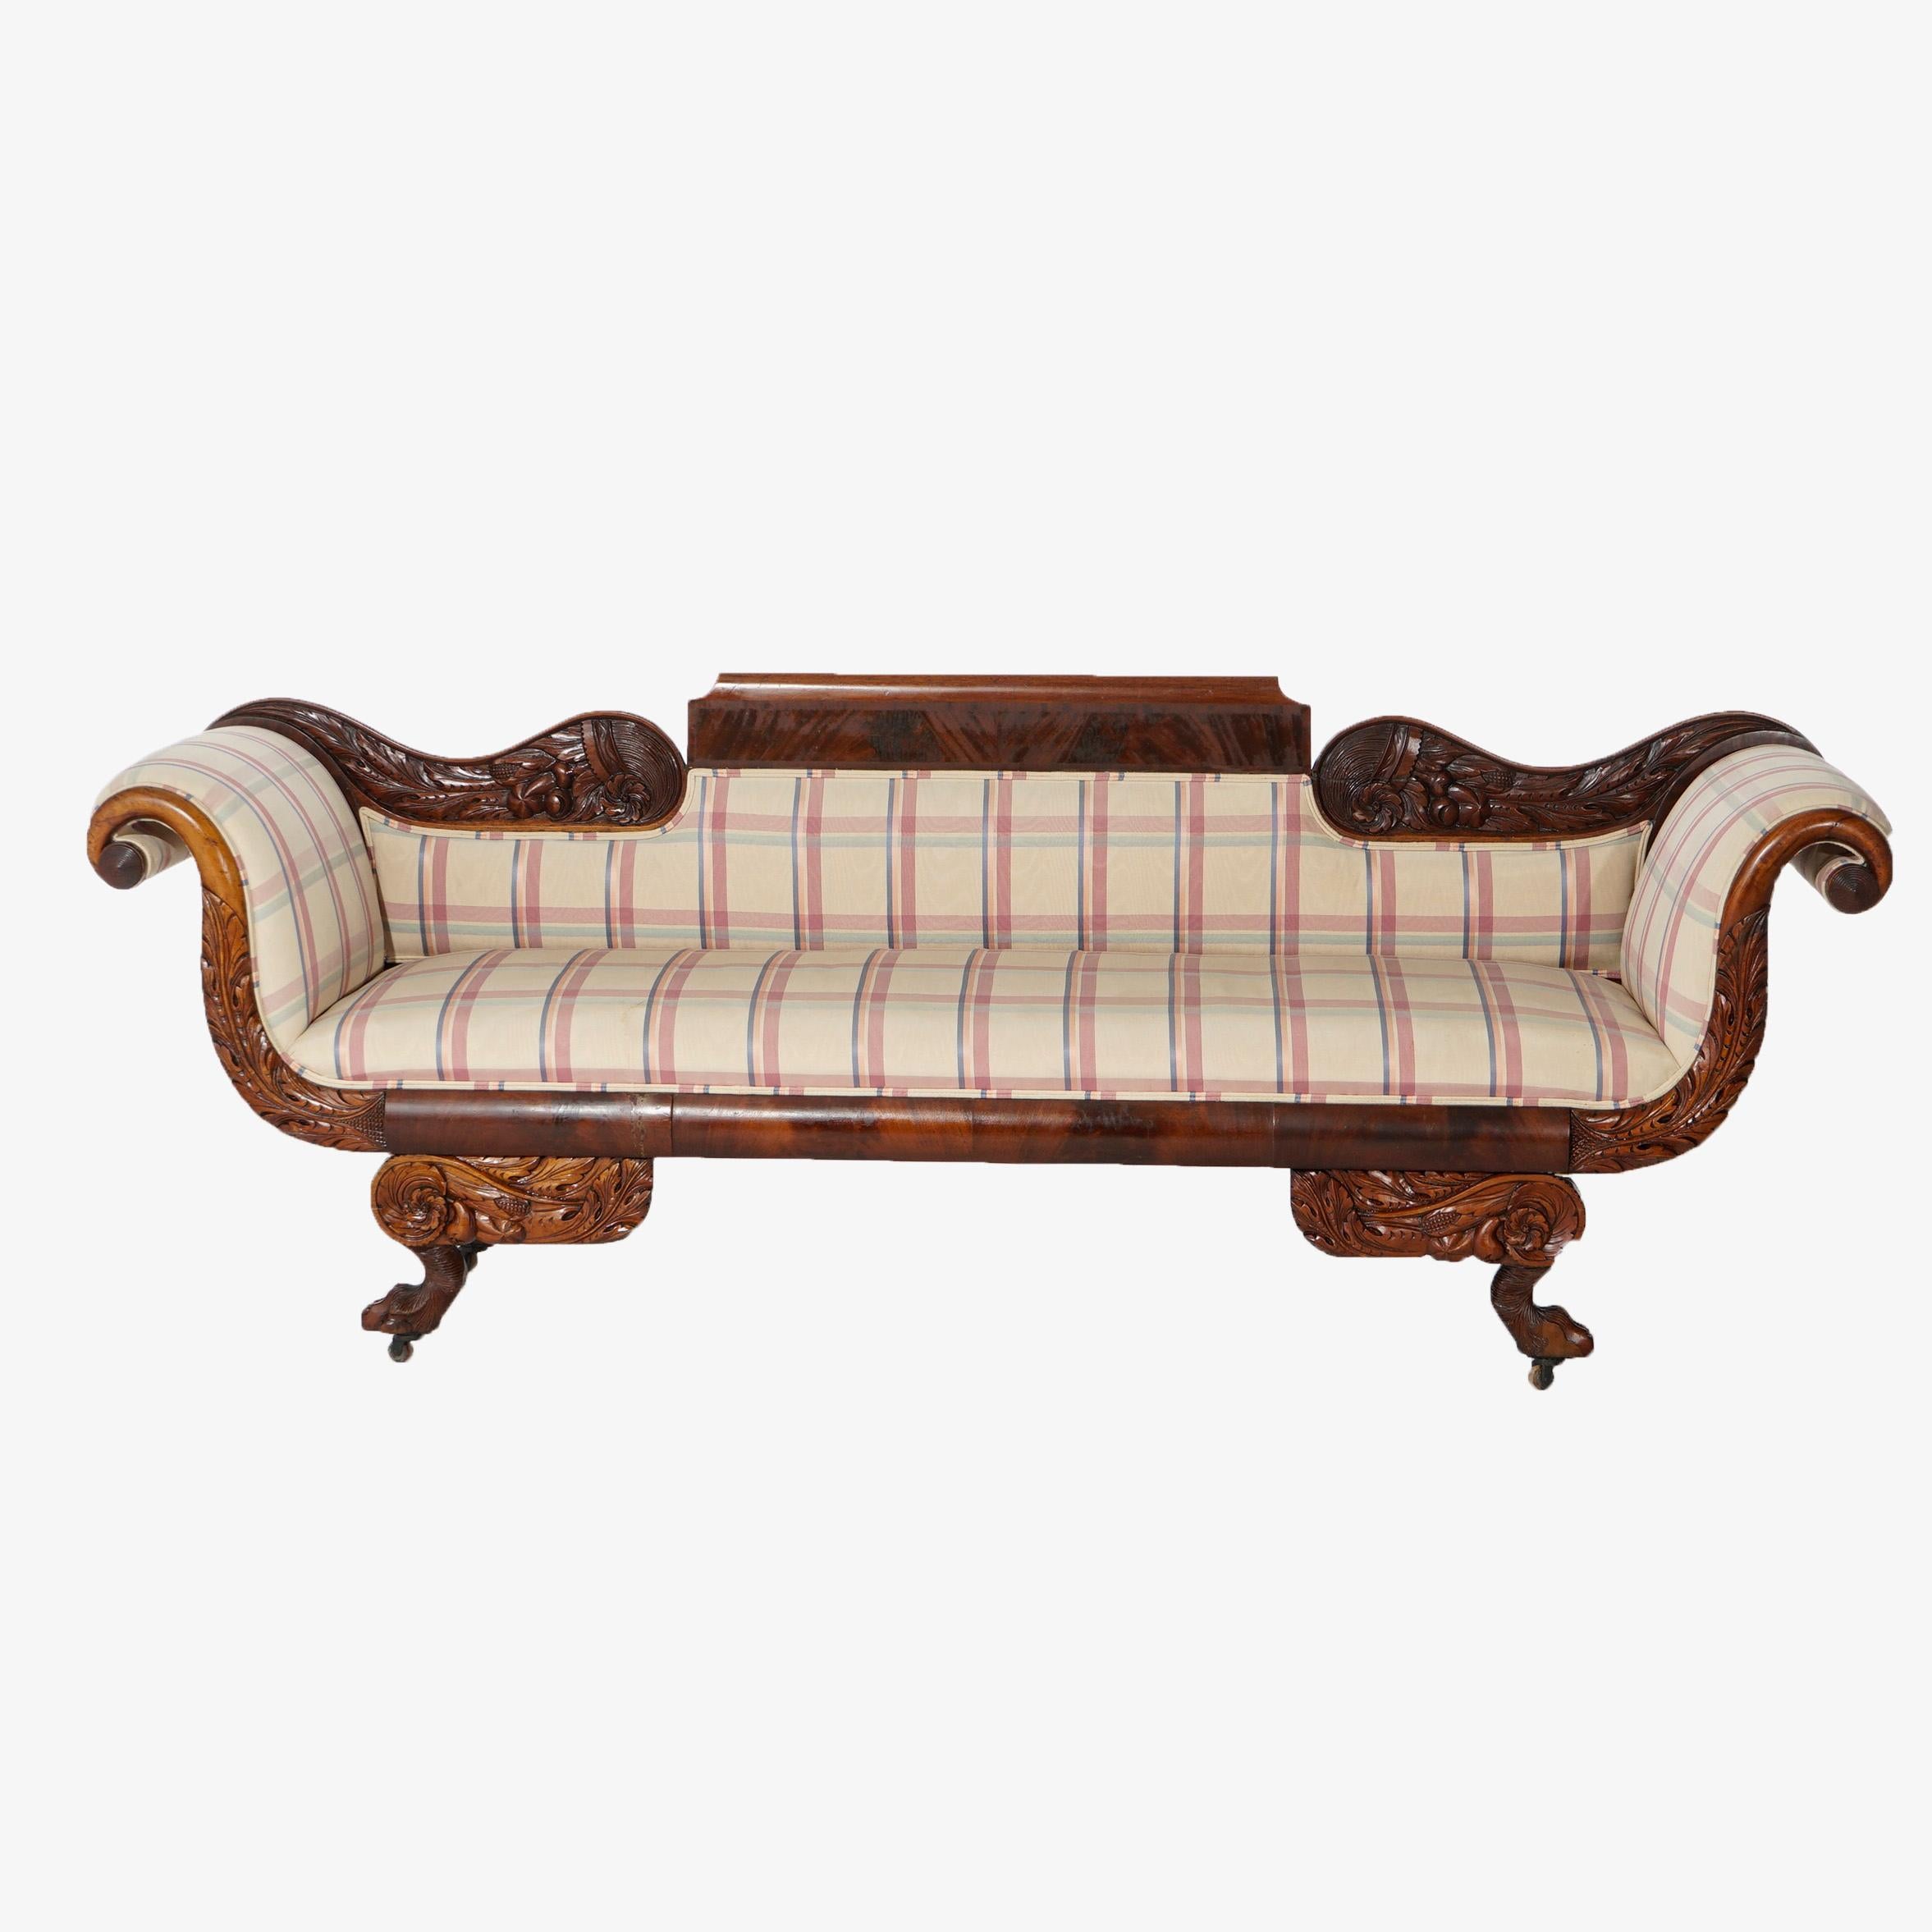 An antique Greco American Empire sofa offers flame mahogany construction with scroll form back over upholstered seat and back, scroll arms, raised on carved paw feet with foliate and floral decoration, c1840.

Measures- 35.25''H x 94''W x